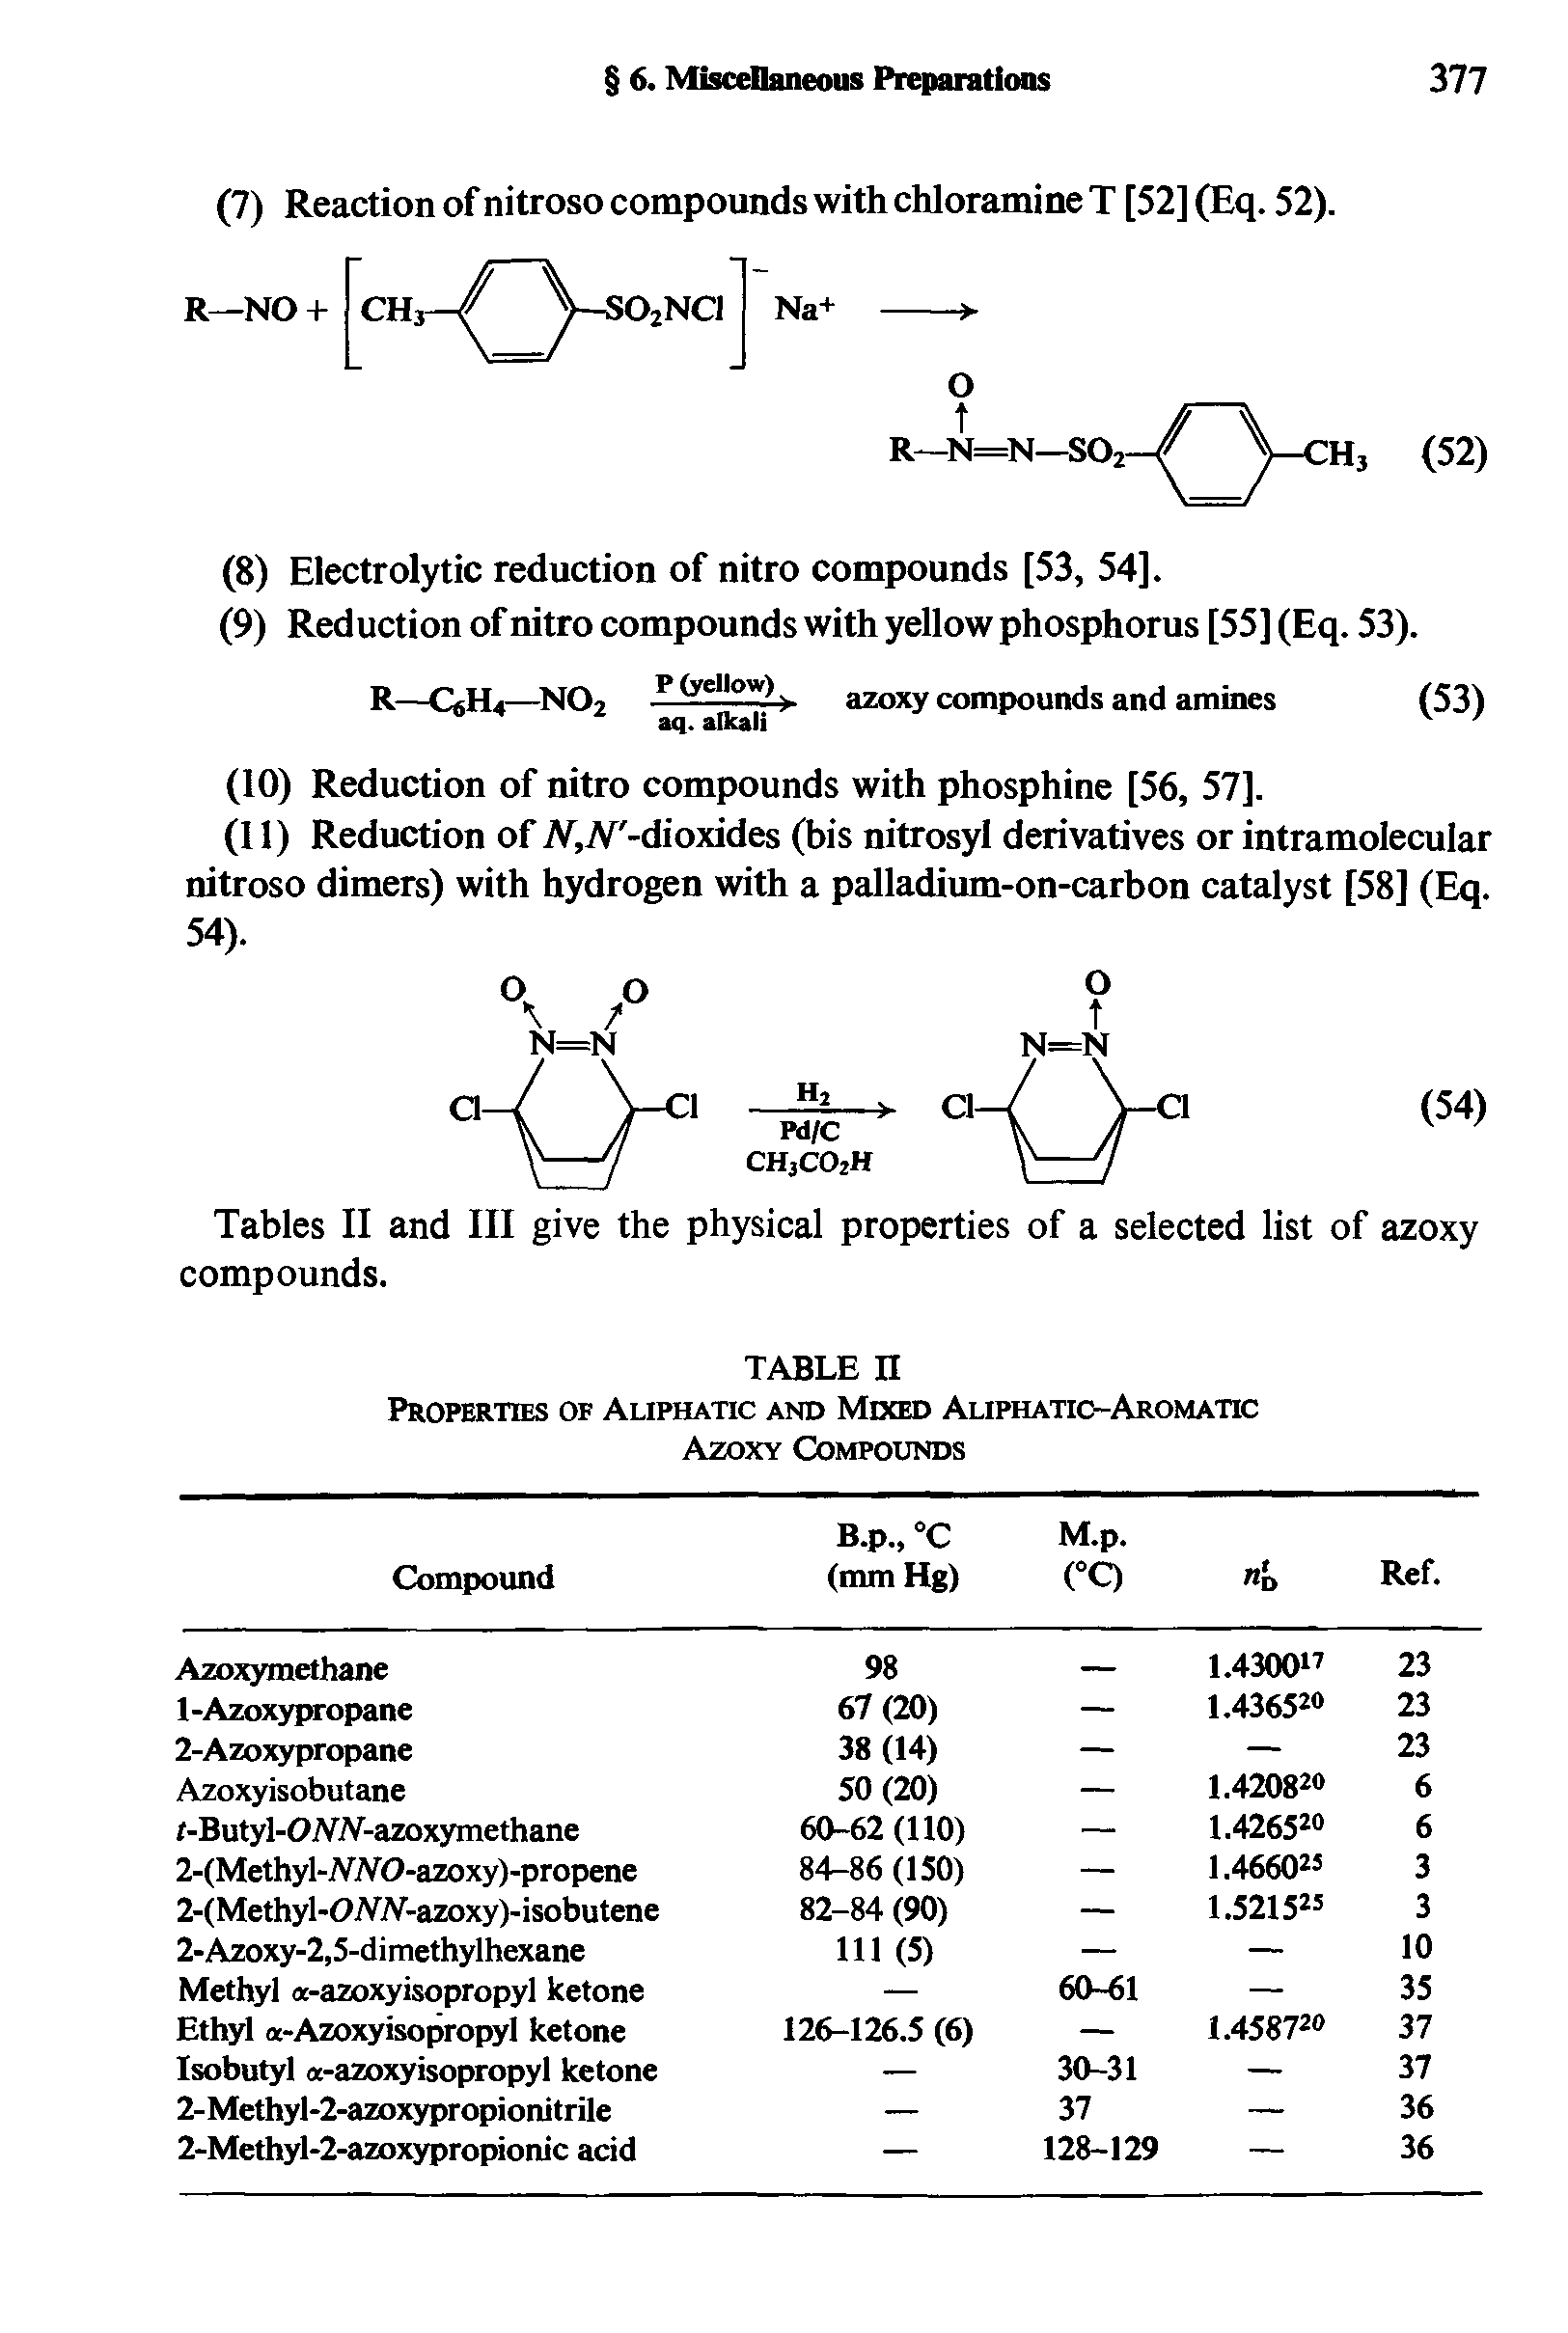 Tables II and III give the physical properties of a selected list of azoxy compounds.